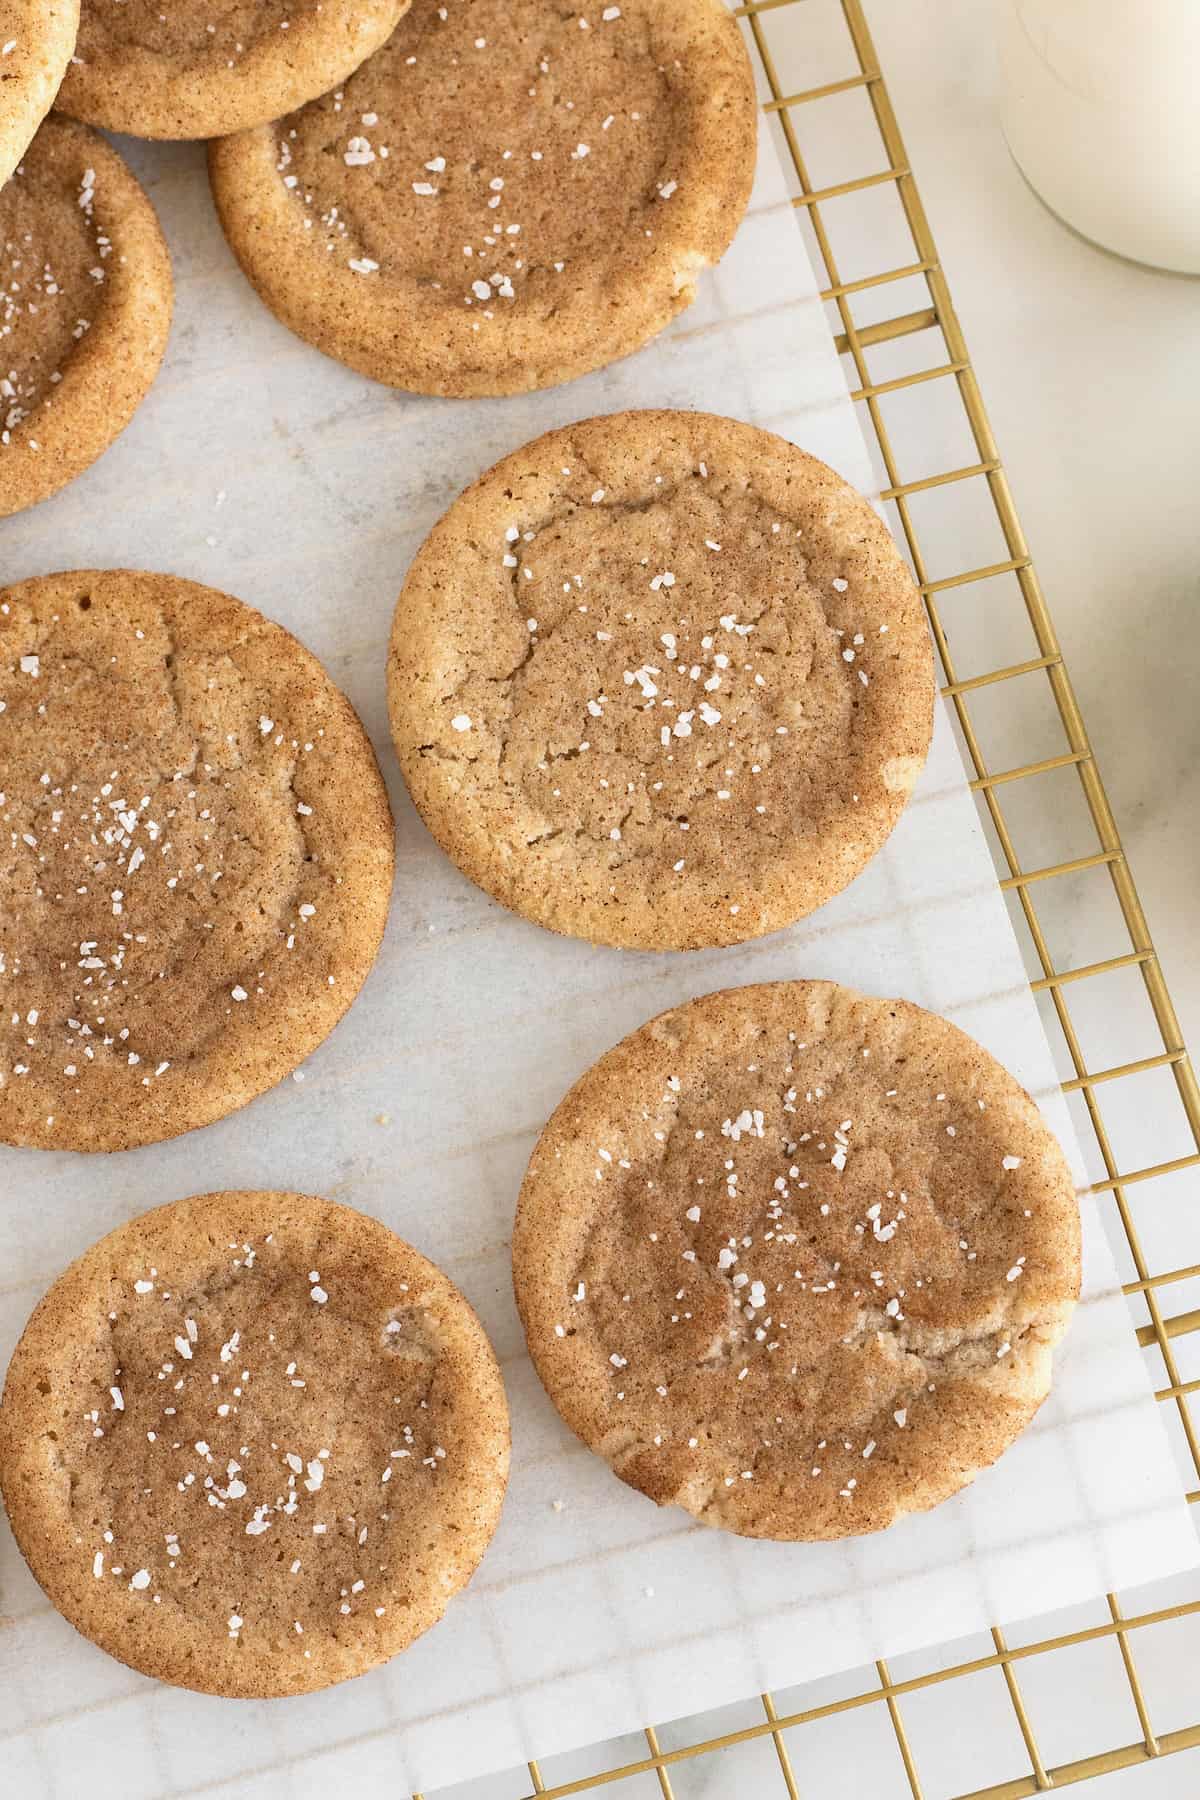 Brown Butter Snickerdoodle cookies sprinkled with sea salt on a parchment lined cooling rack.